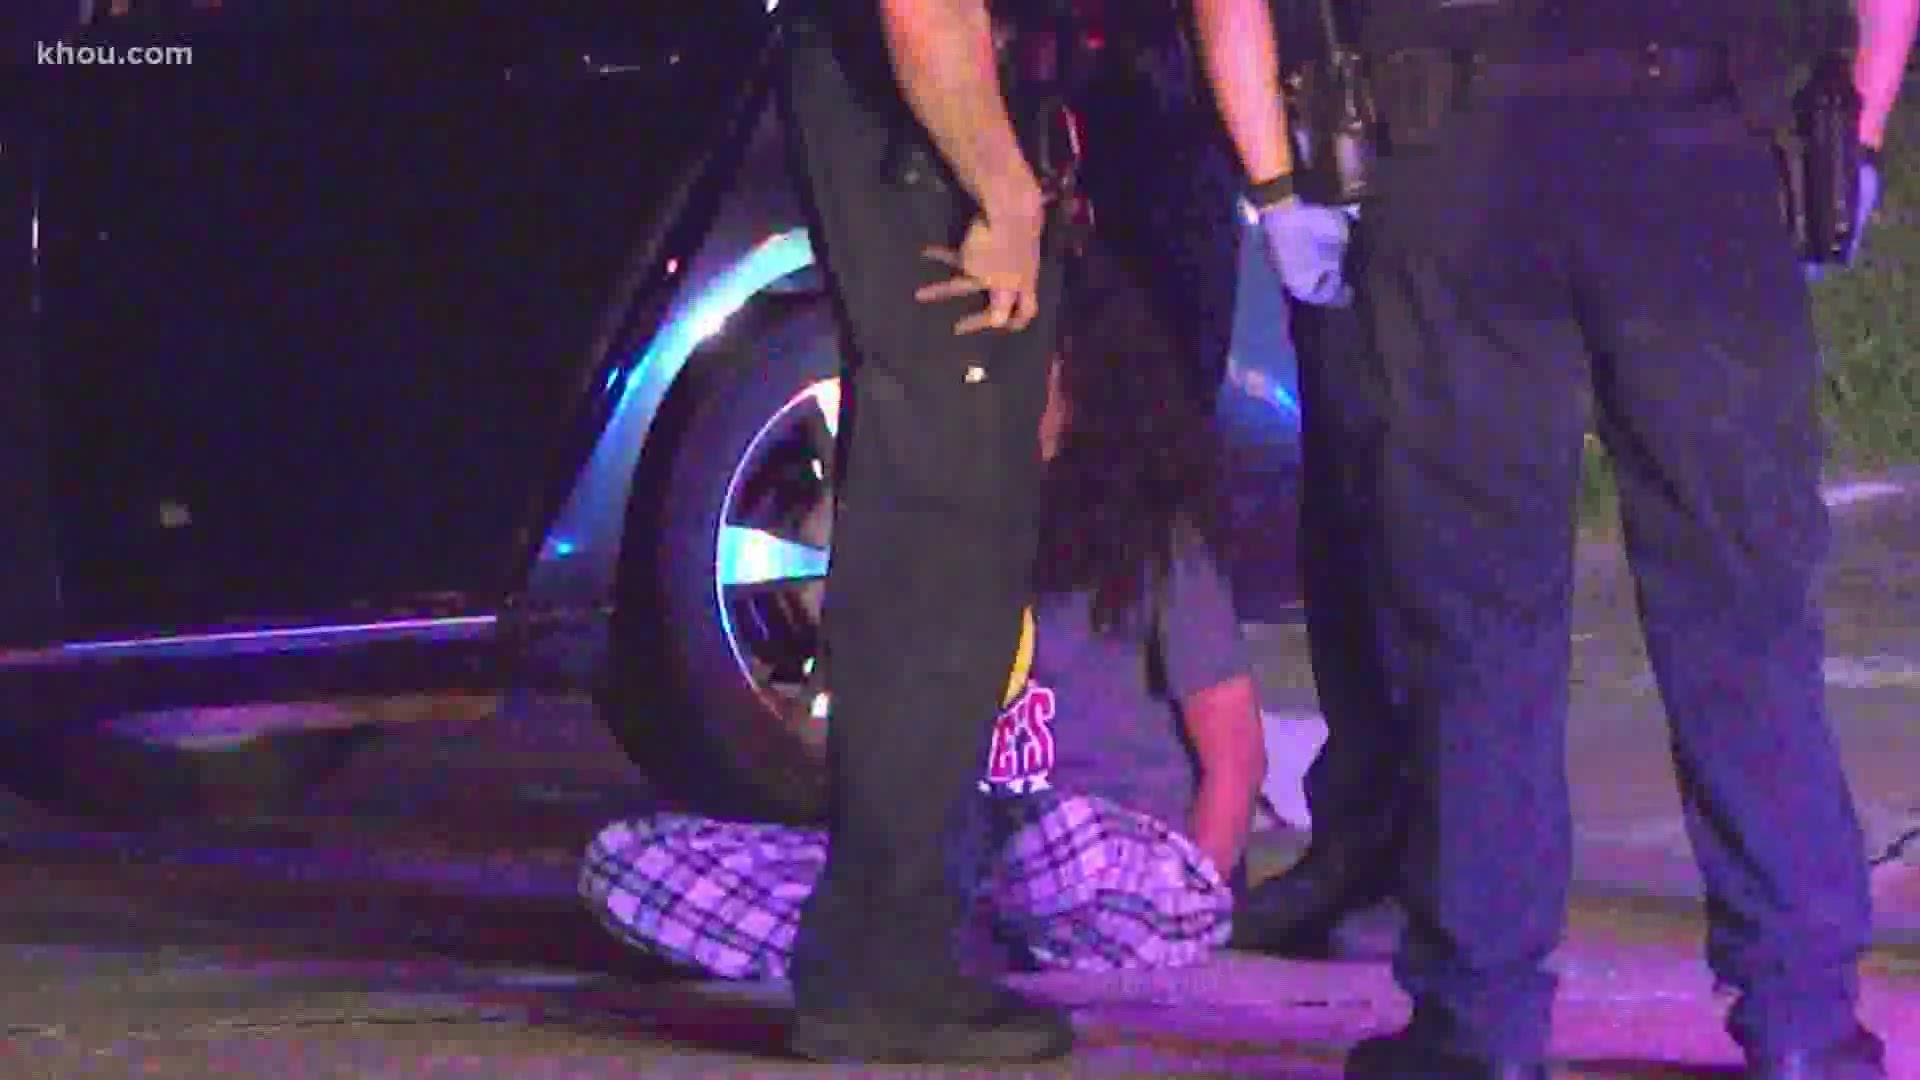 Four people were detained early Friday after a pursuit and a crash involving a police officer.